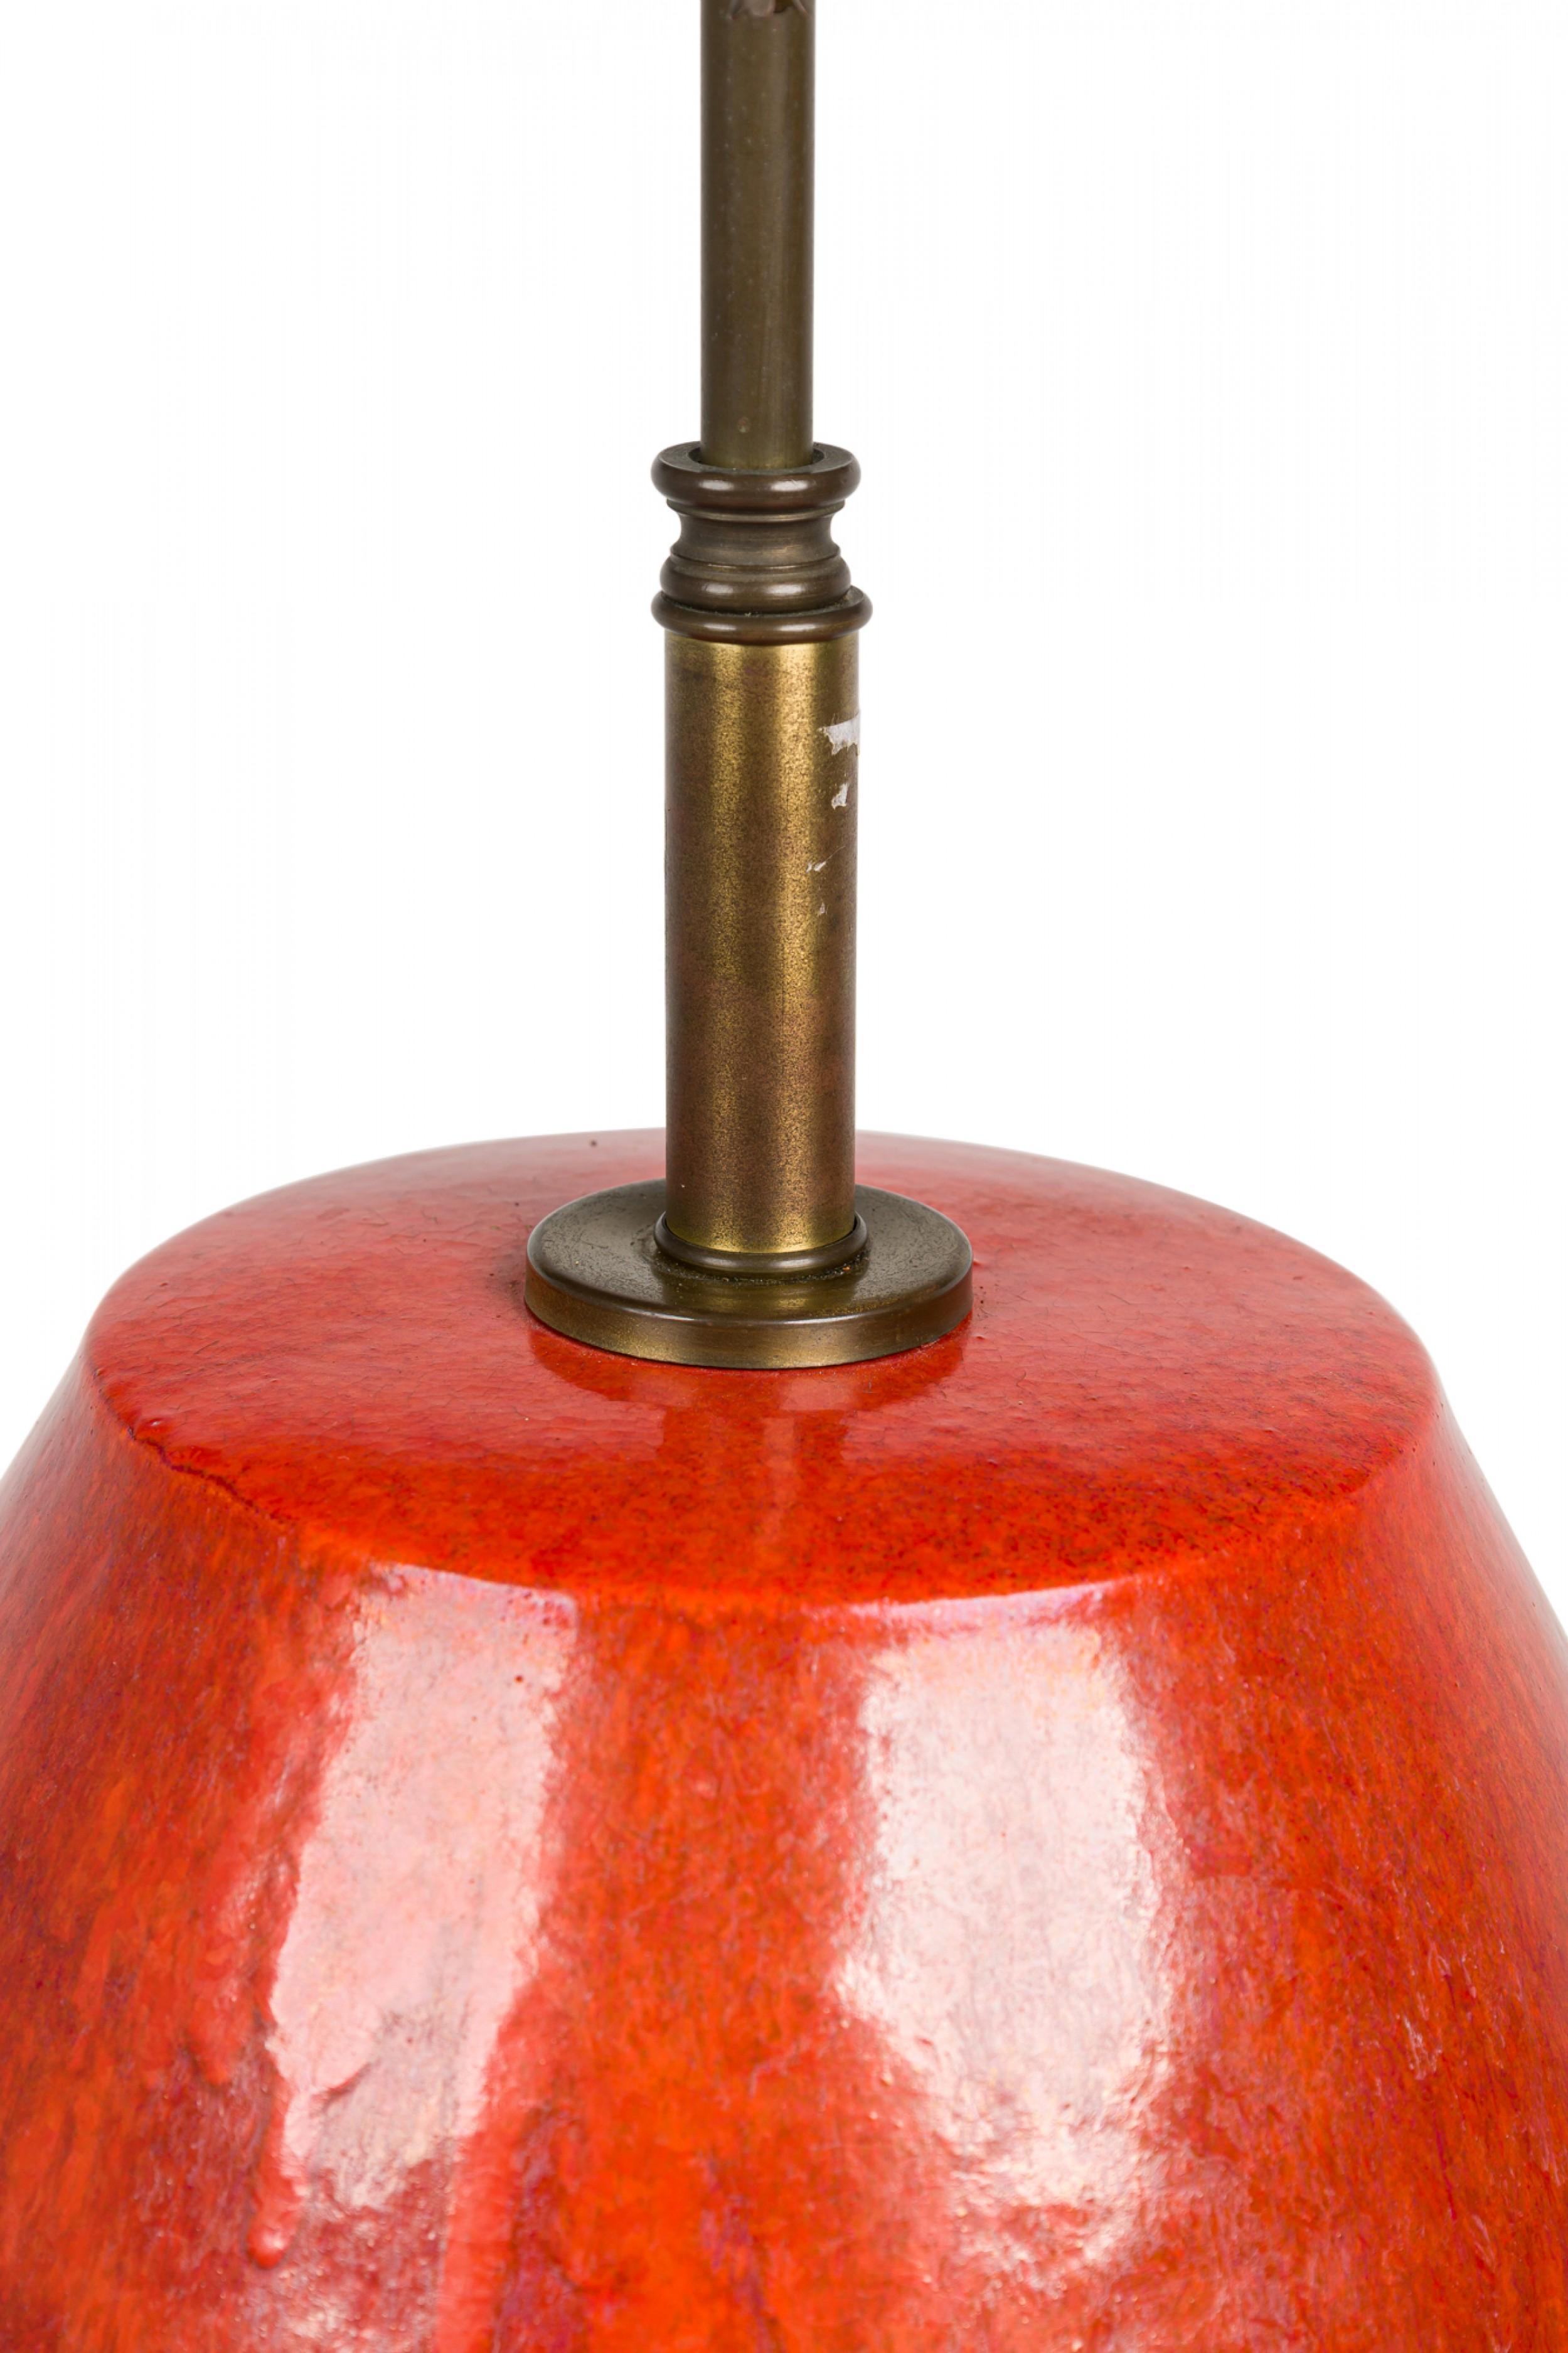 Mid-Century American ceramic table lamp in egg-like ovoid form with flattened top, an extended brass stem leading to a faux bamboo finial and two functioning light switch sockets with beaded pulls. The body is glazed in a textured burnt orange,